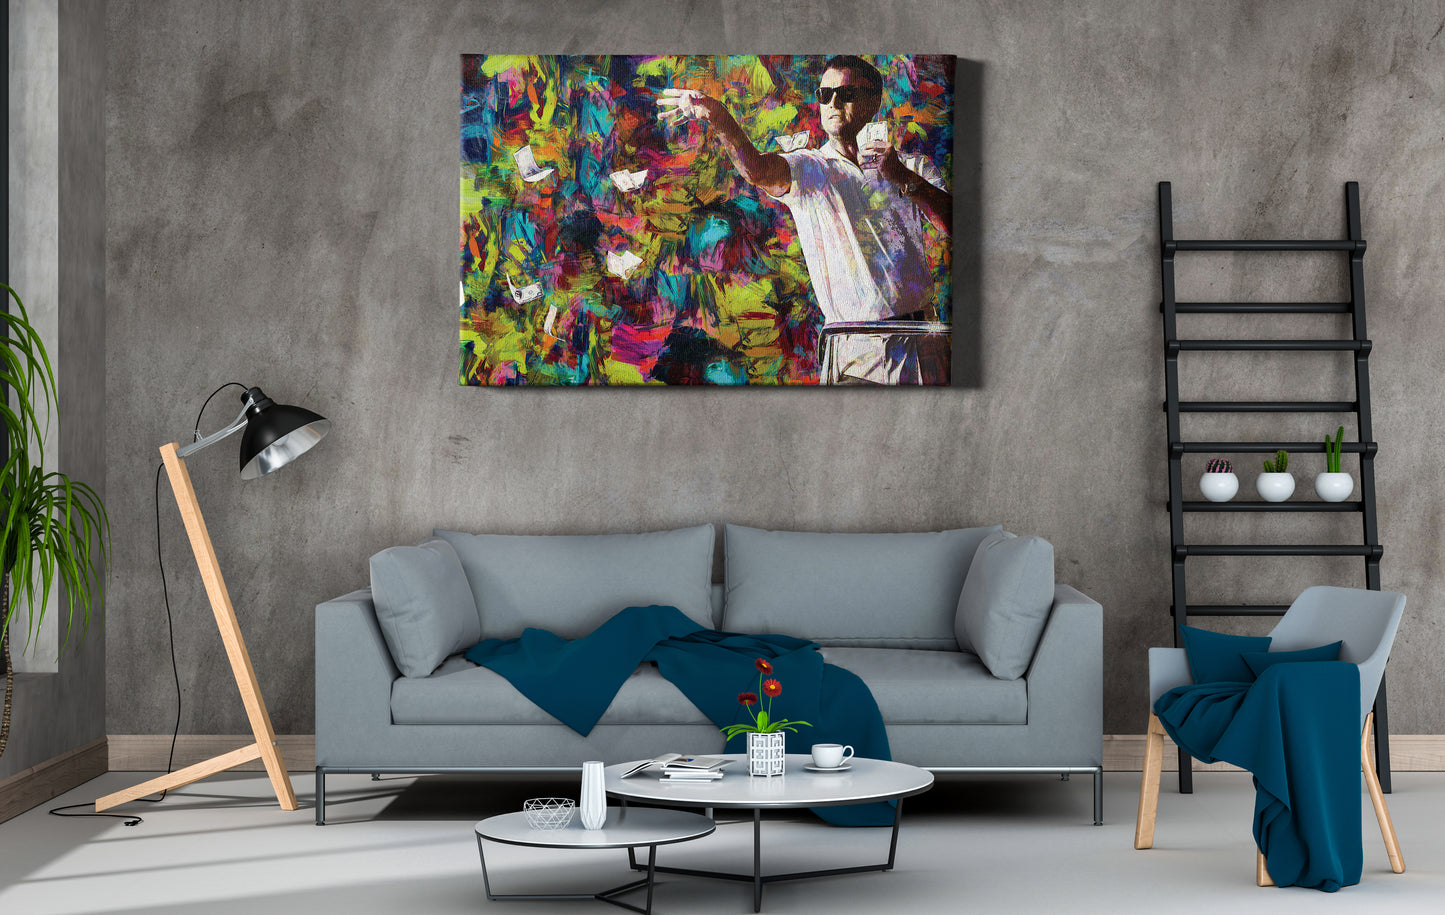 The Wolf of Wall Street 'throwing money' Poster Leonardo Di Caprio Movie Painting Hand Made Posters Canvas Print Wall Art Home Decor